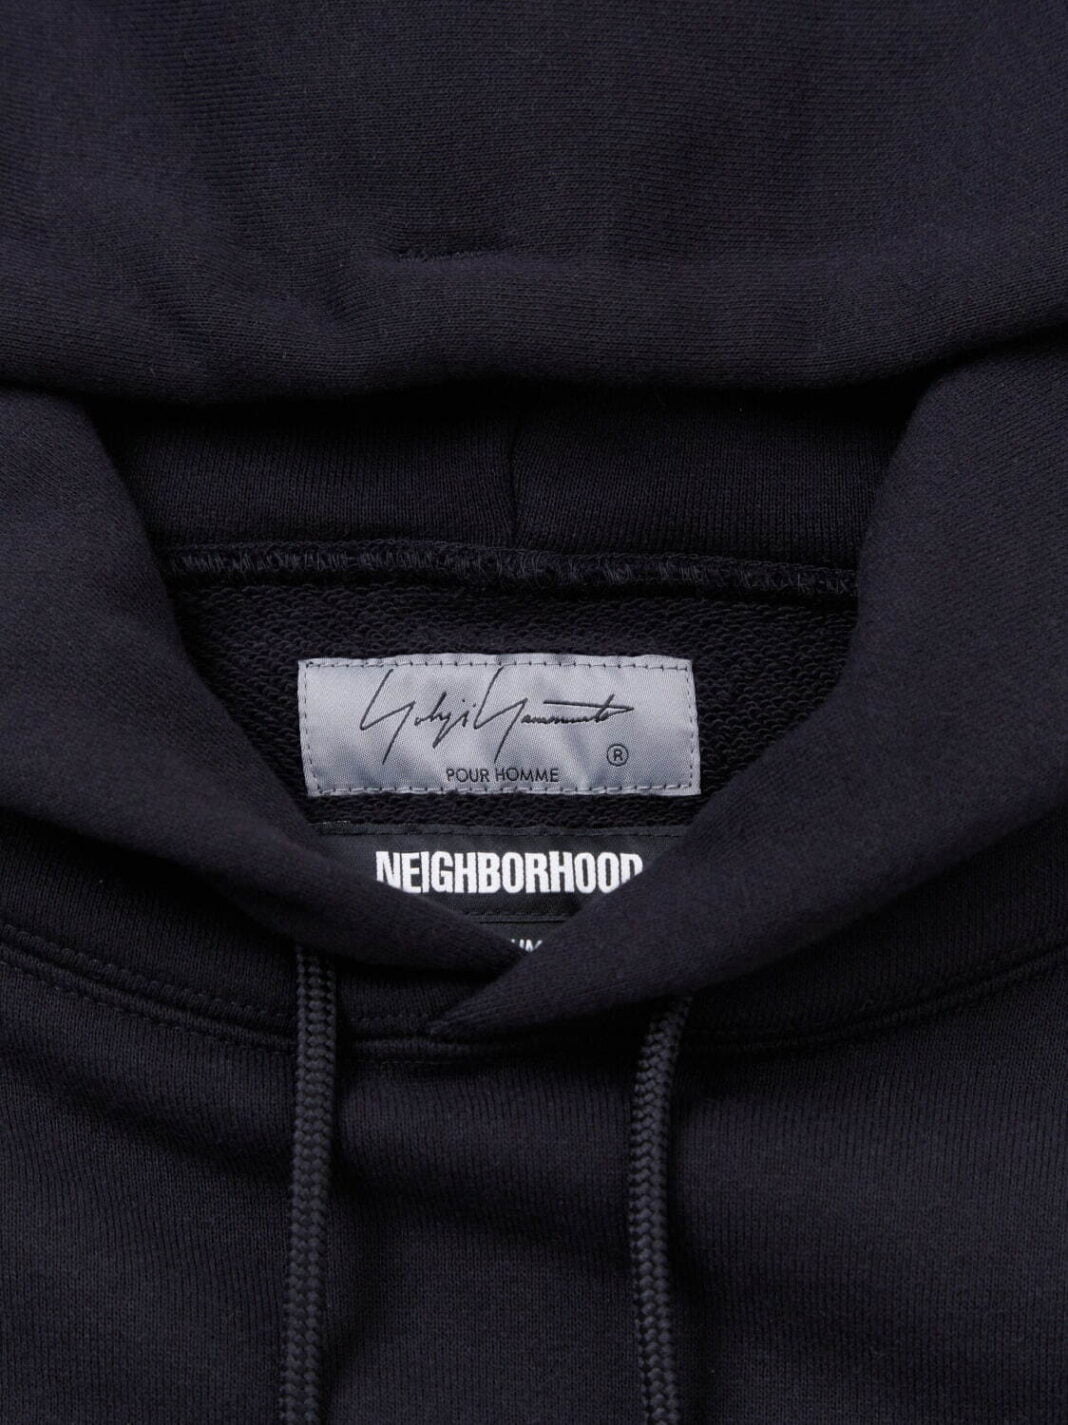 NEIGHBORHOOD x Yohji Yamamoto POUR HOMME Collection will be available ...